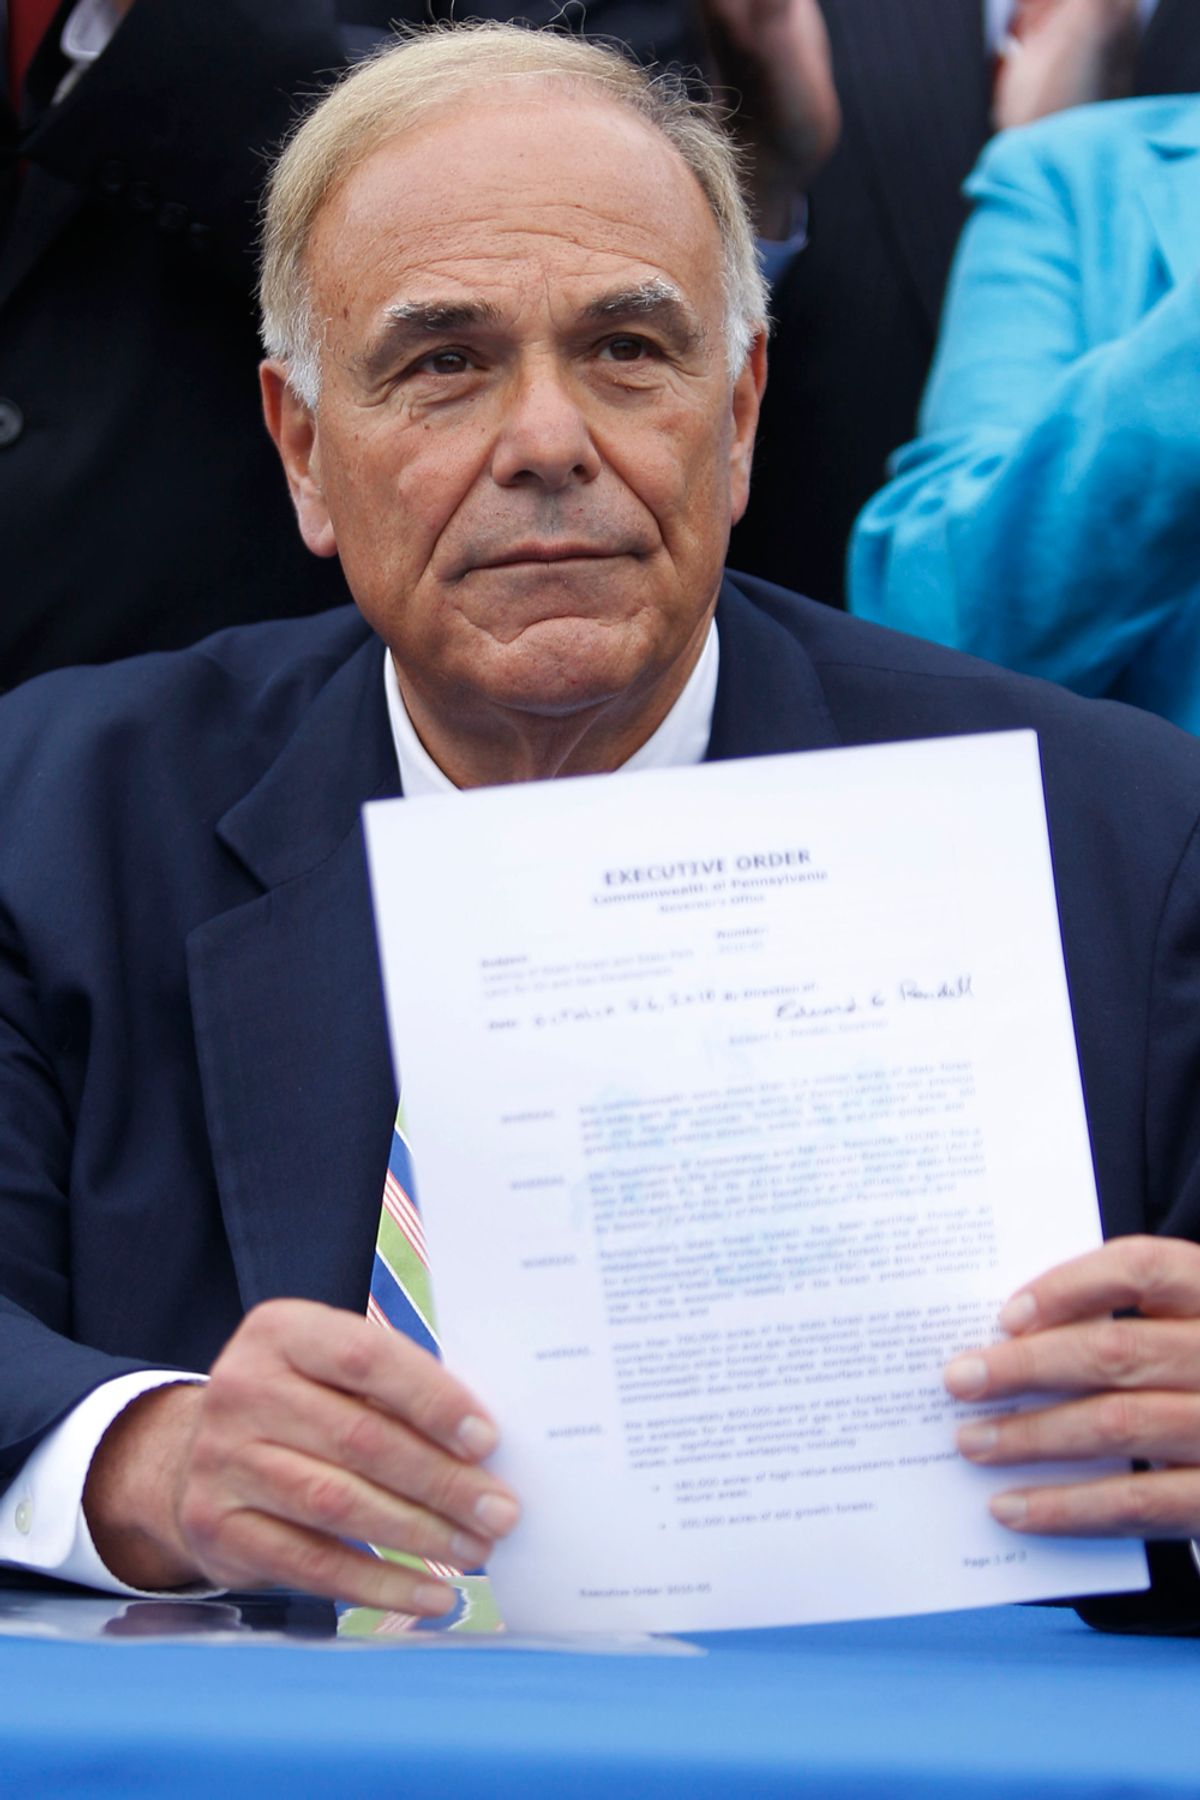 Gov. Ed Rendell displays a signed executive order at Penn Treaty Park in Philadelphia, Tuesday, Oct. 26, 2010. The order is to prevent any further leasing of state forest land for Marcellus Shale drilling. (AP Photo/Matt Rourke)    (Matt Rourke)